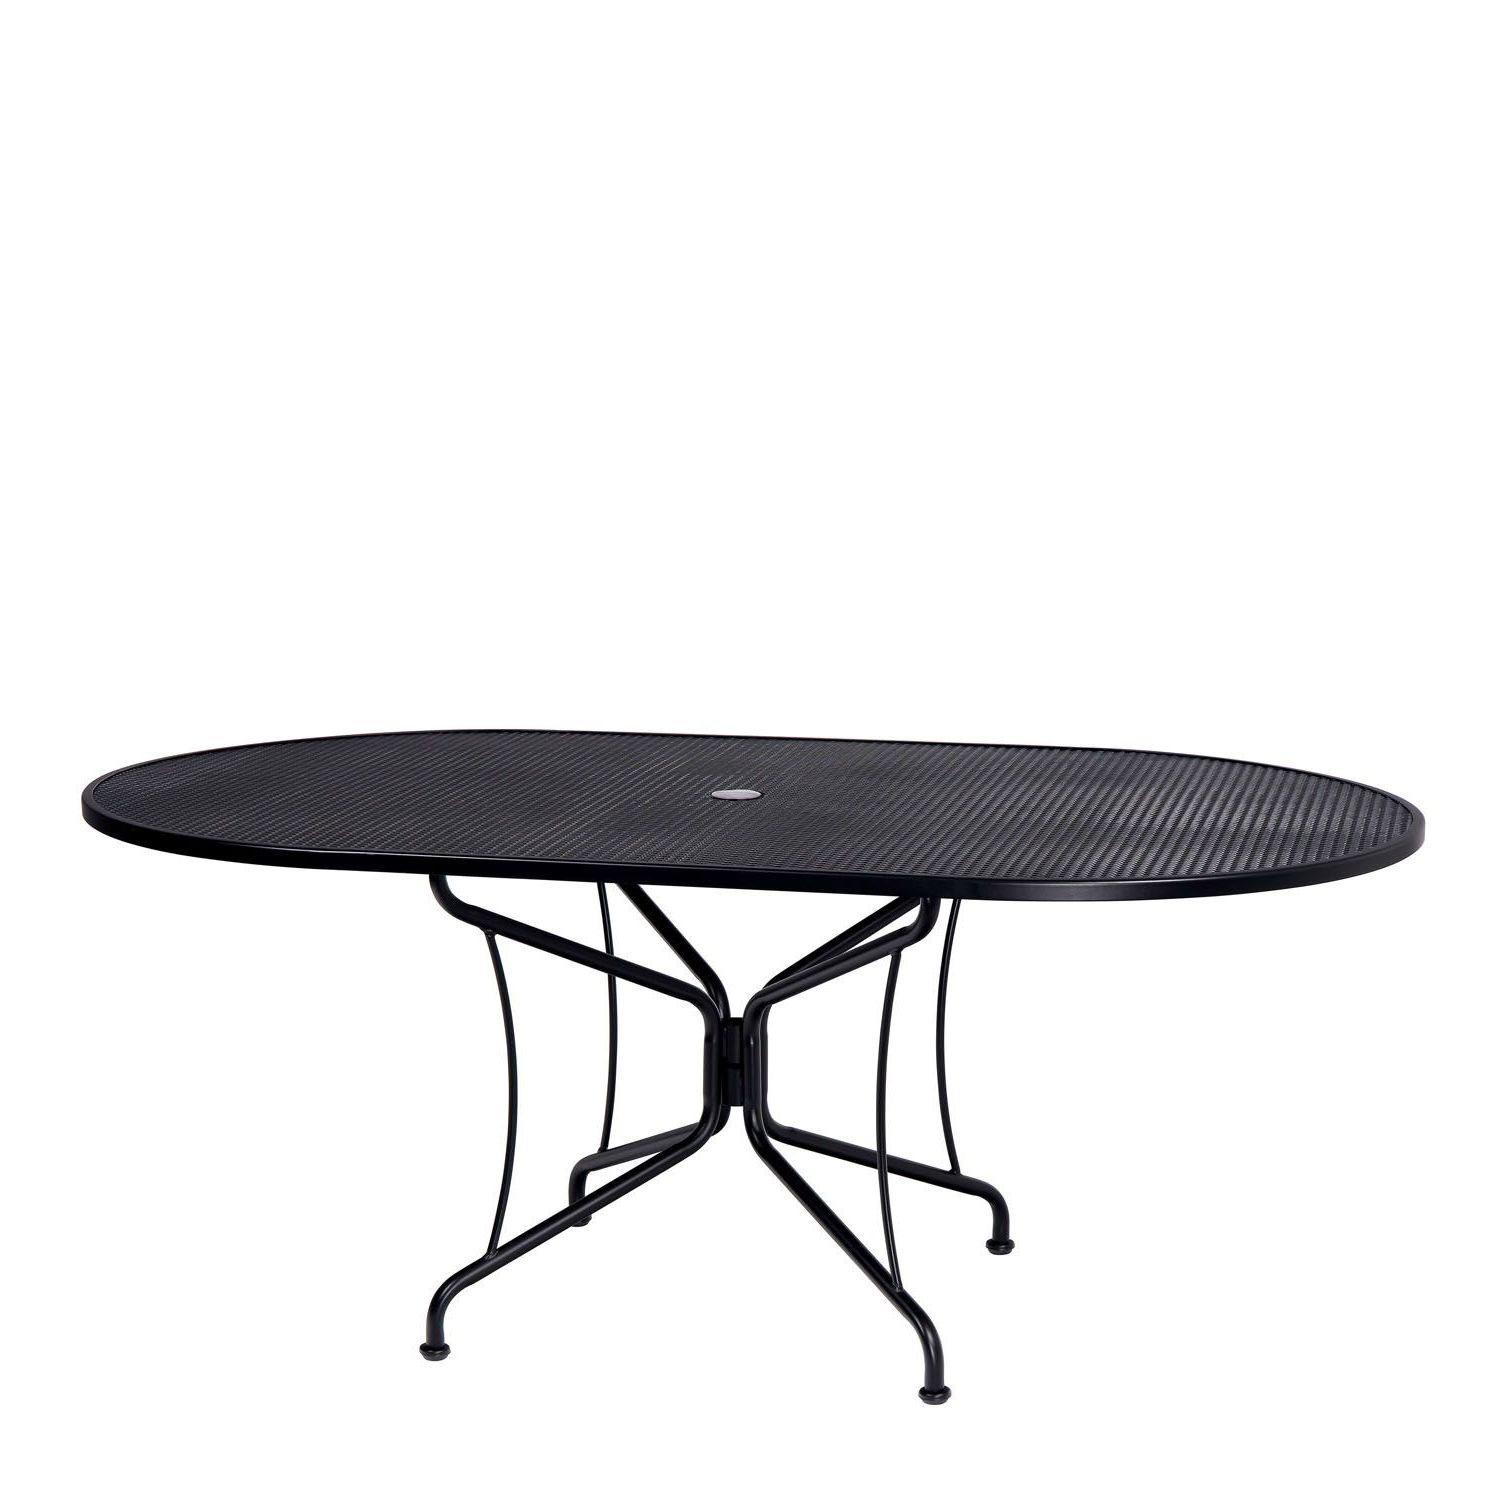 Preferred Woodard 72" Oval Mesh Umbrella Table Outdoor Furniture – Sunnyland Outdoor  Patio Furniture Dallas Fort Worth Tx Intended For Glass Oval Outdoor Tables (View 12 of 15)